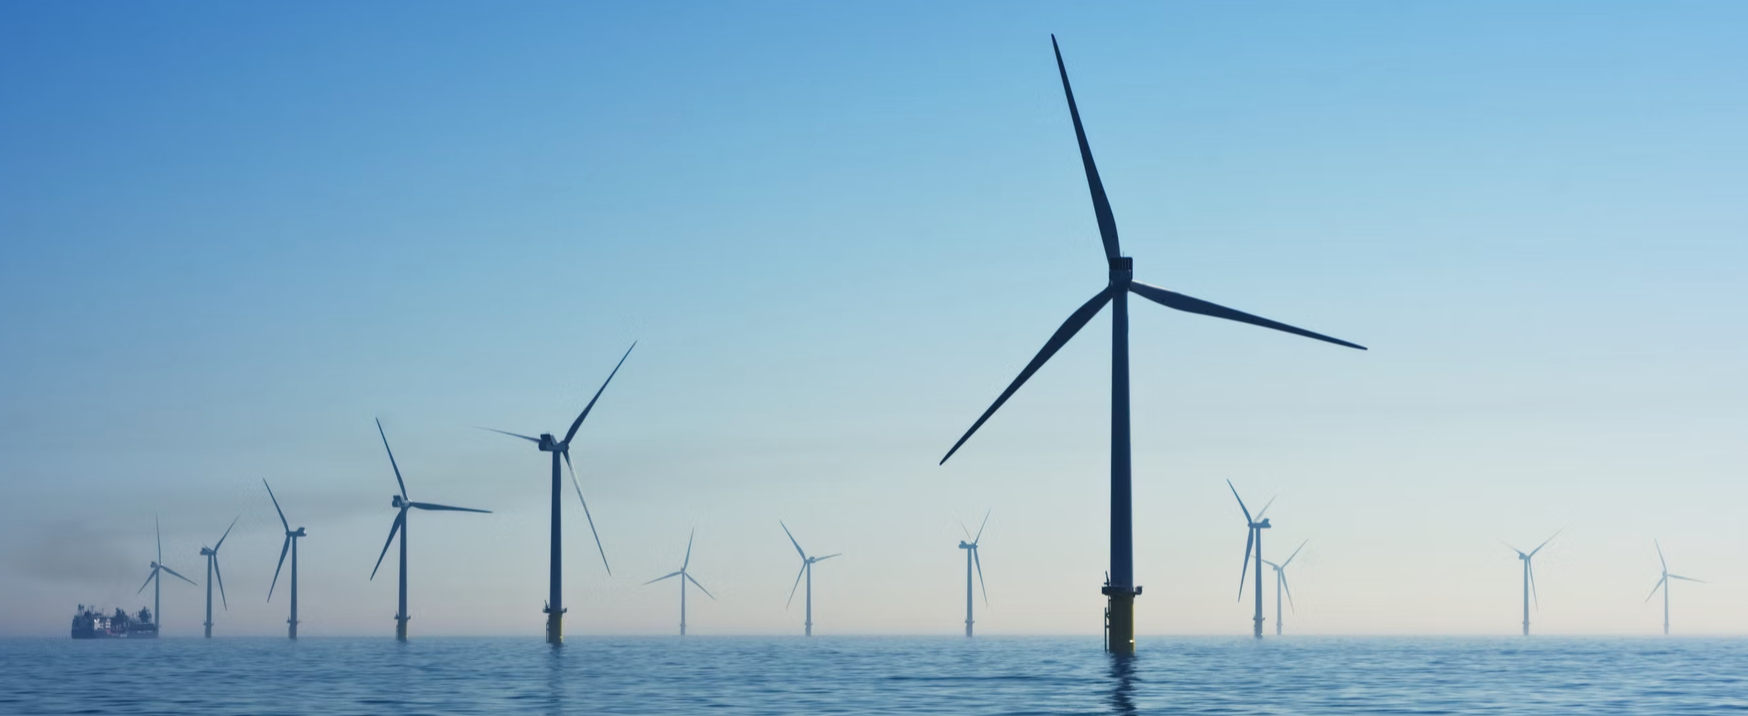 Database of the largest wind turbine manufacturers